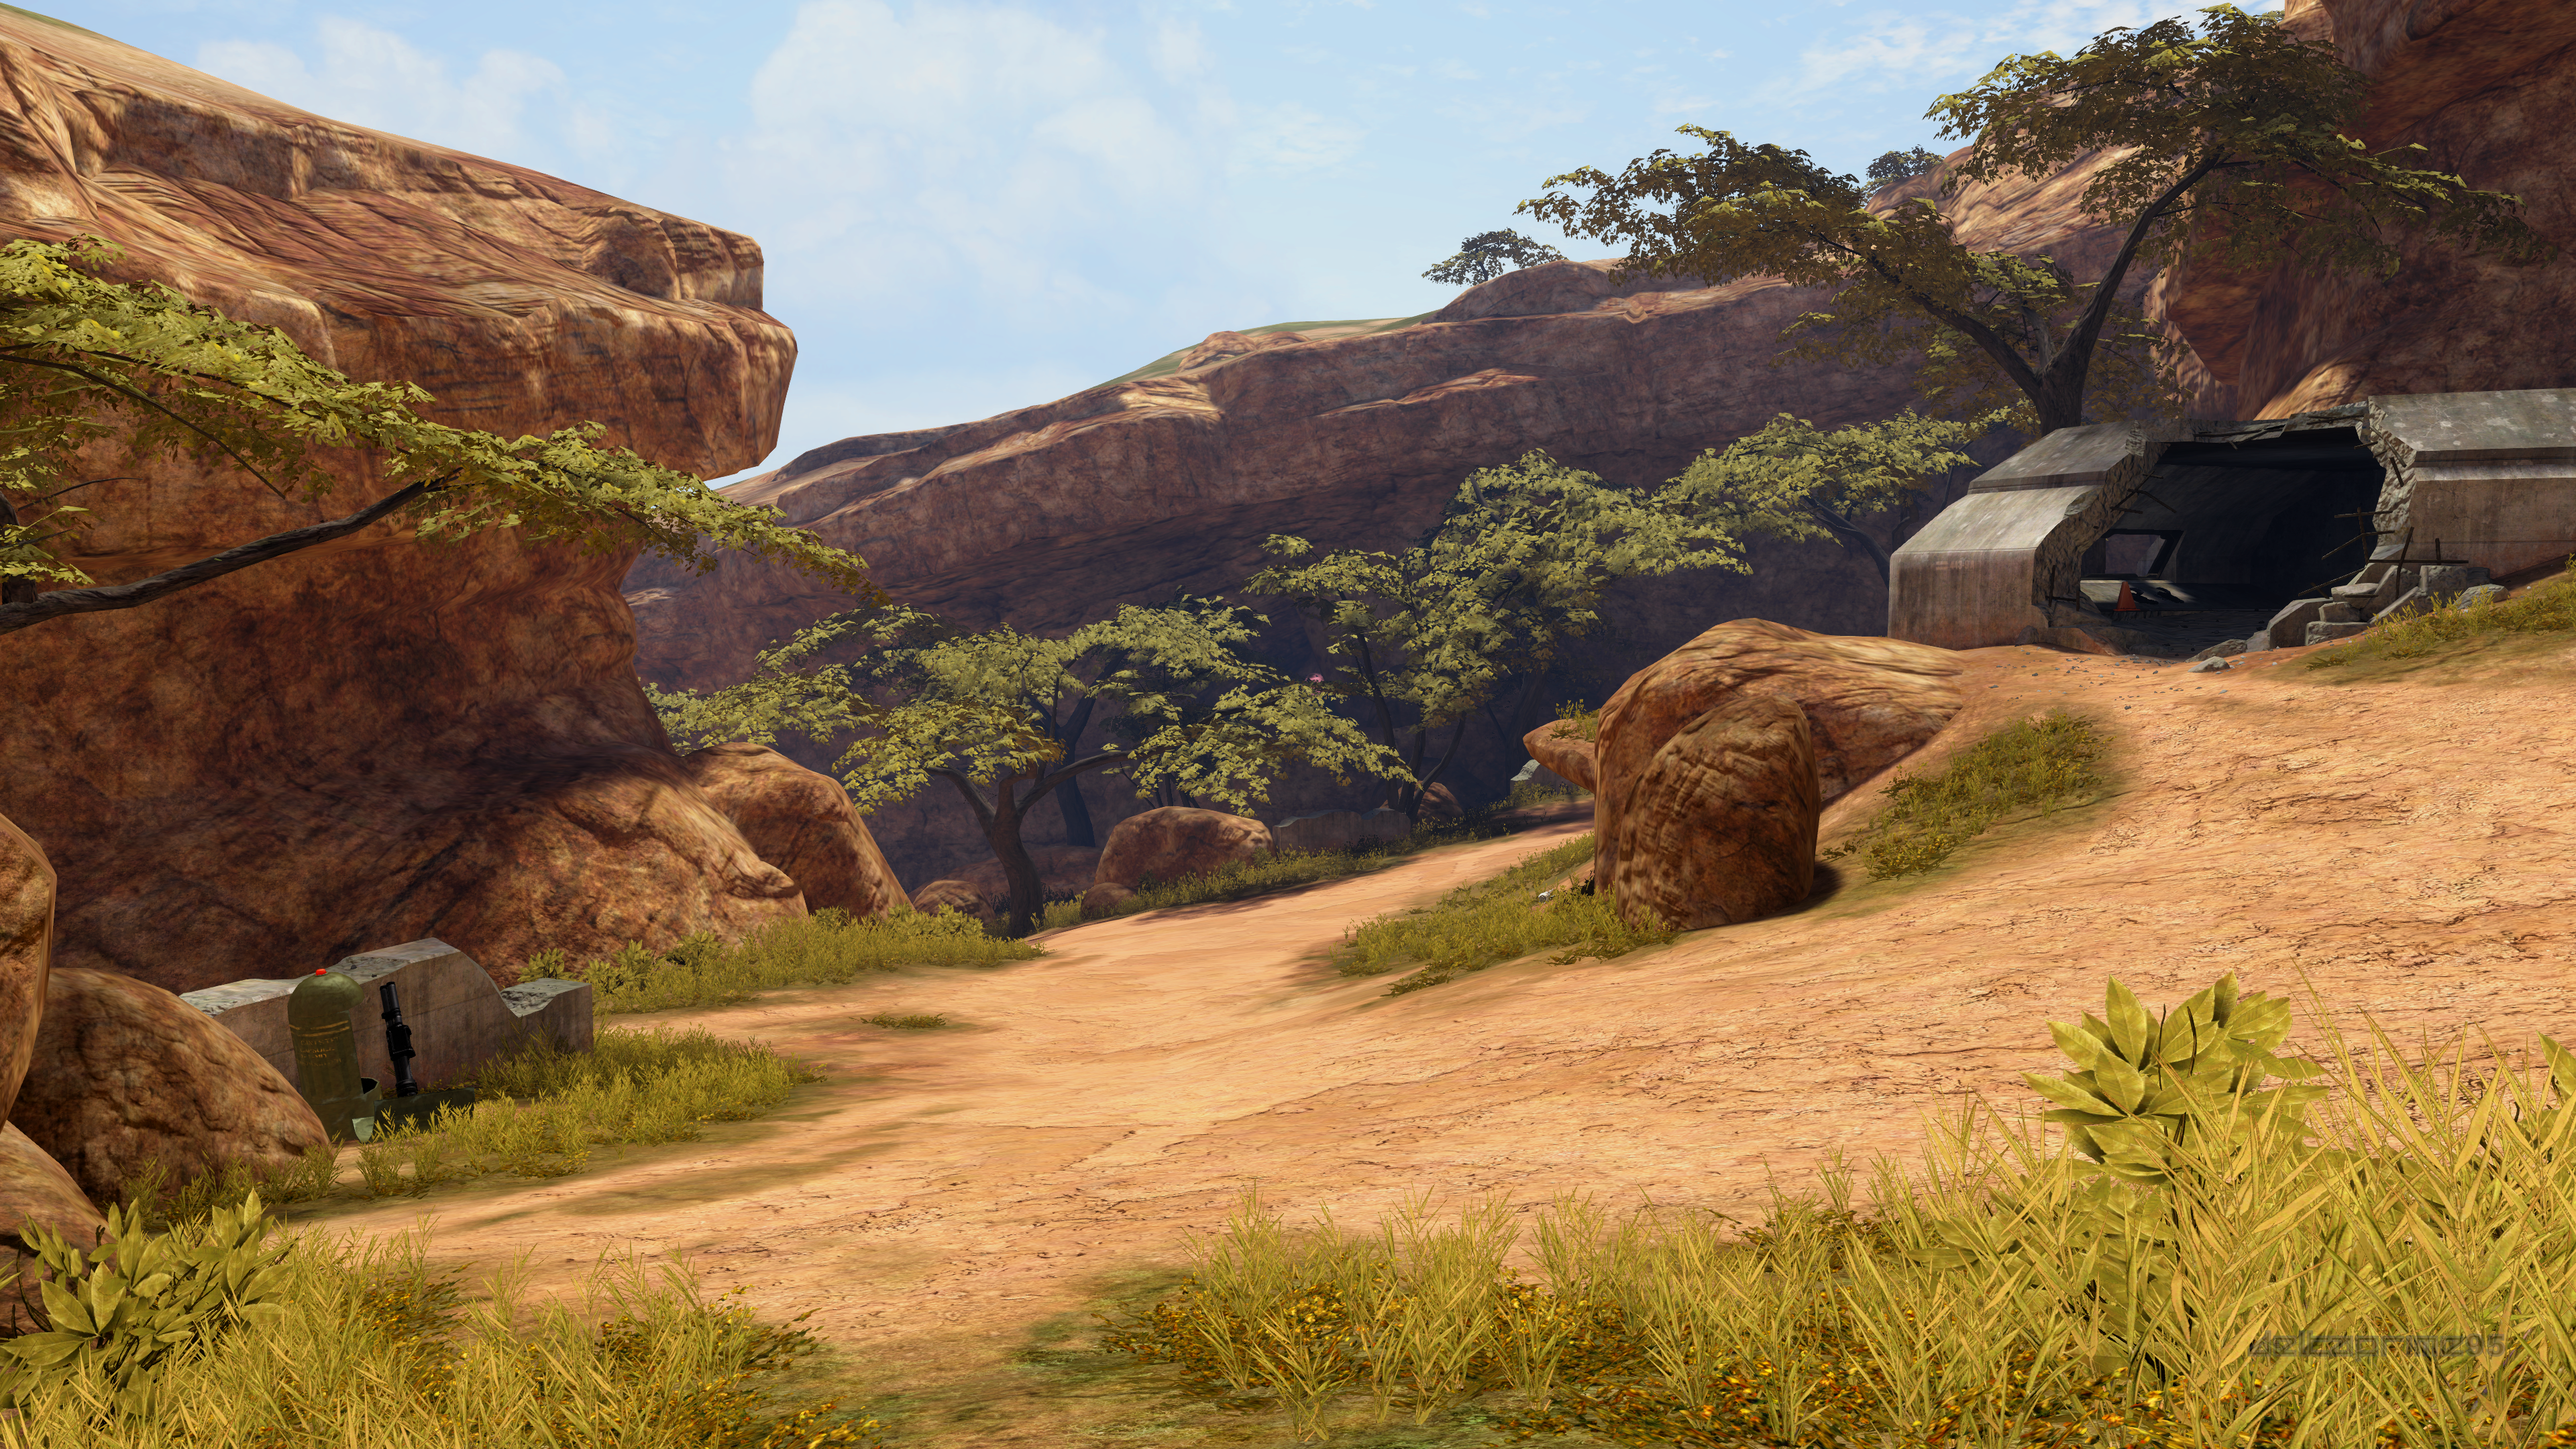 In Game PC Gaming Screen Shot Halo 3 High Ground Multiplayer Map Africa Science Fiction Bunker Rocke 3840x2160